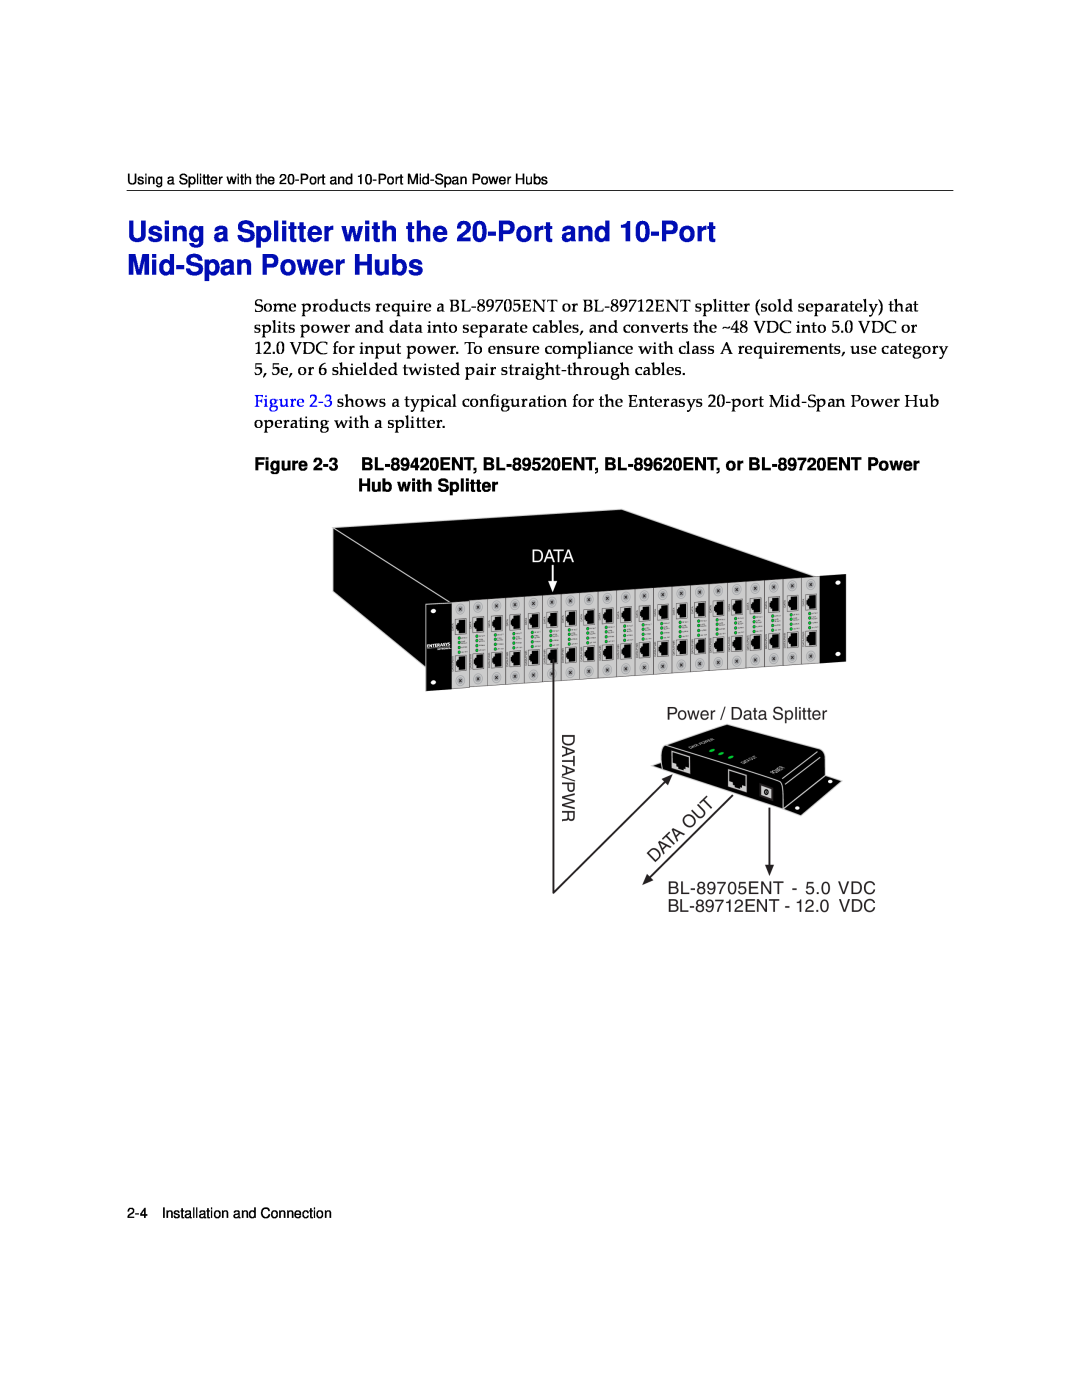 Enterasys Networks BL-89420ENT Using a Splitter with the 20-Port and 10-Port Mid-Span Power Hubs, Power / Data Splitter 